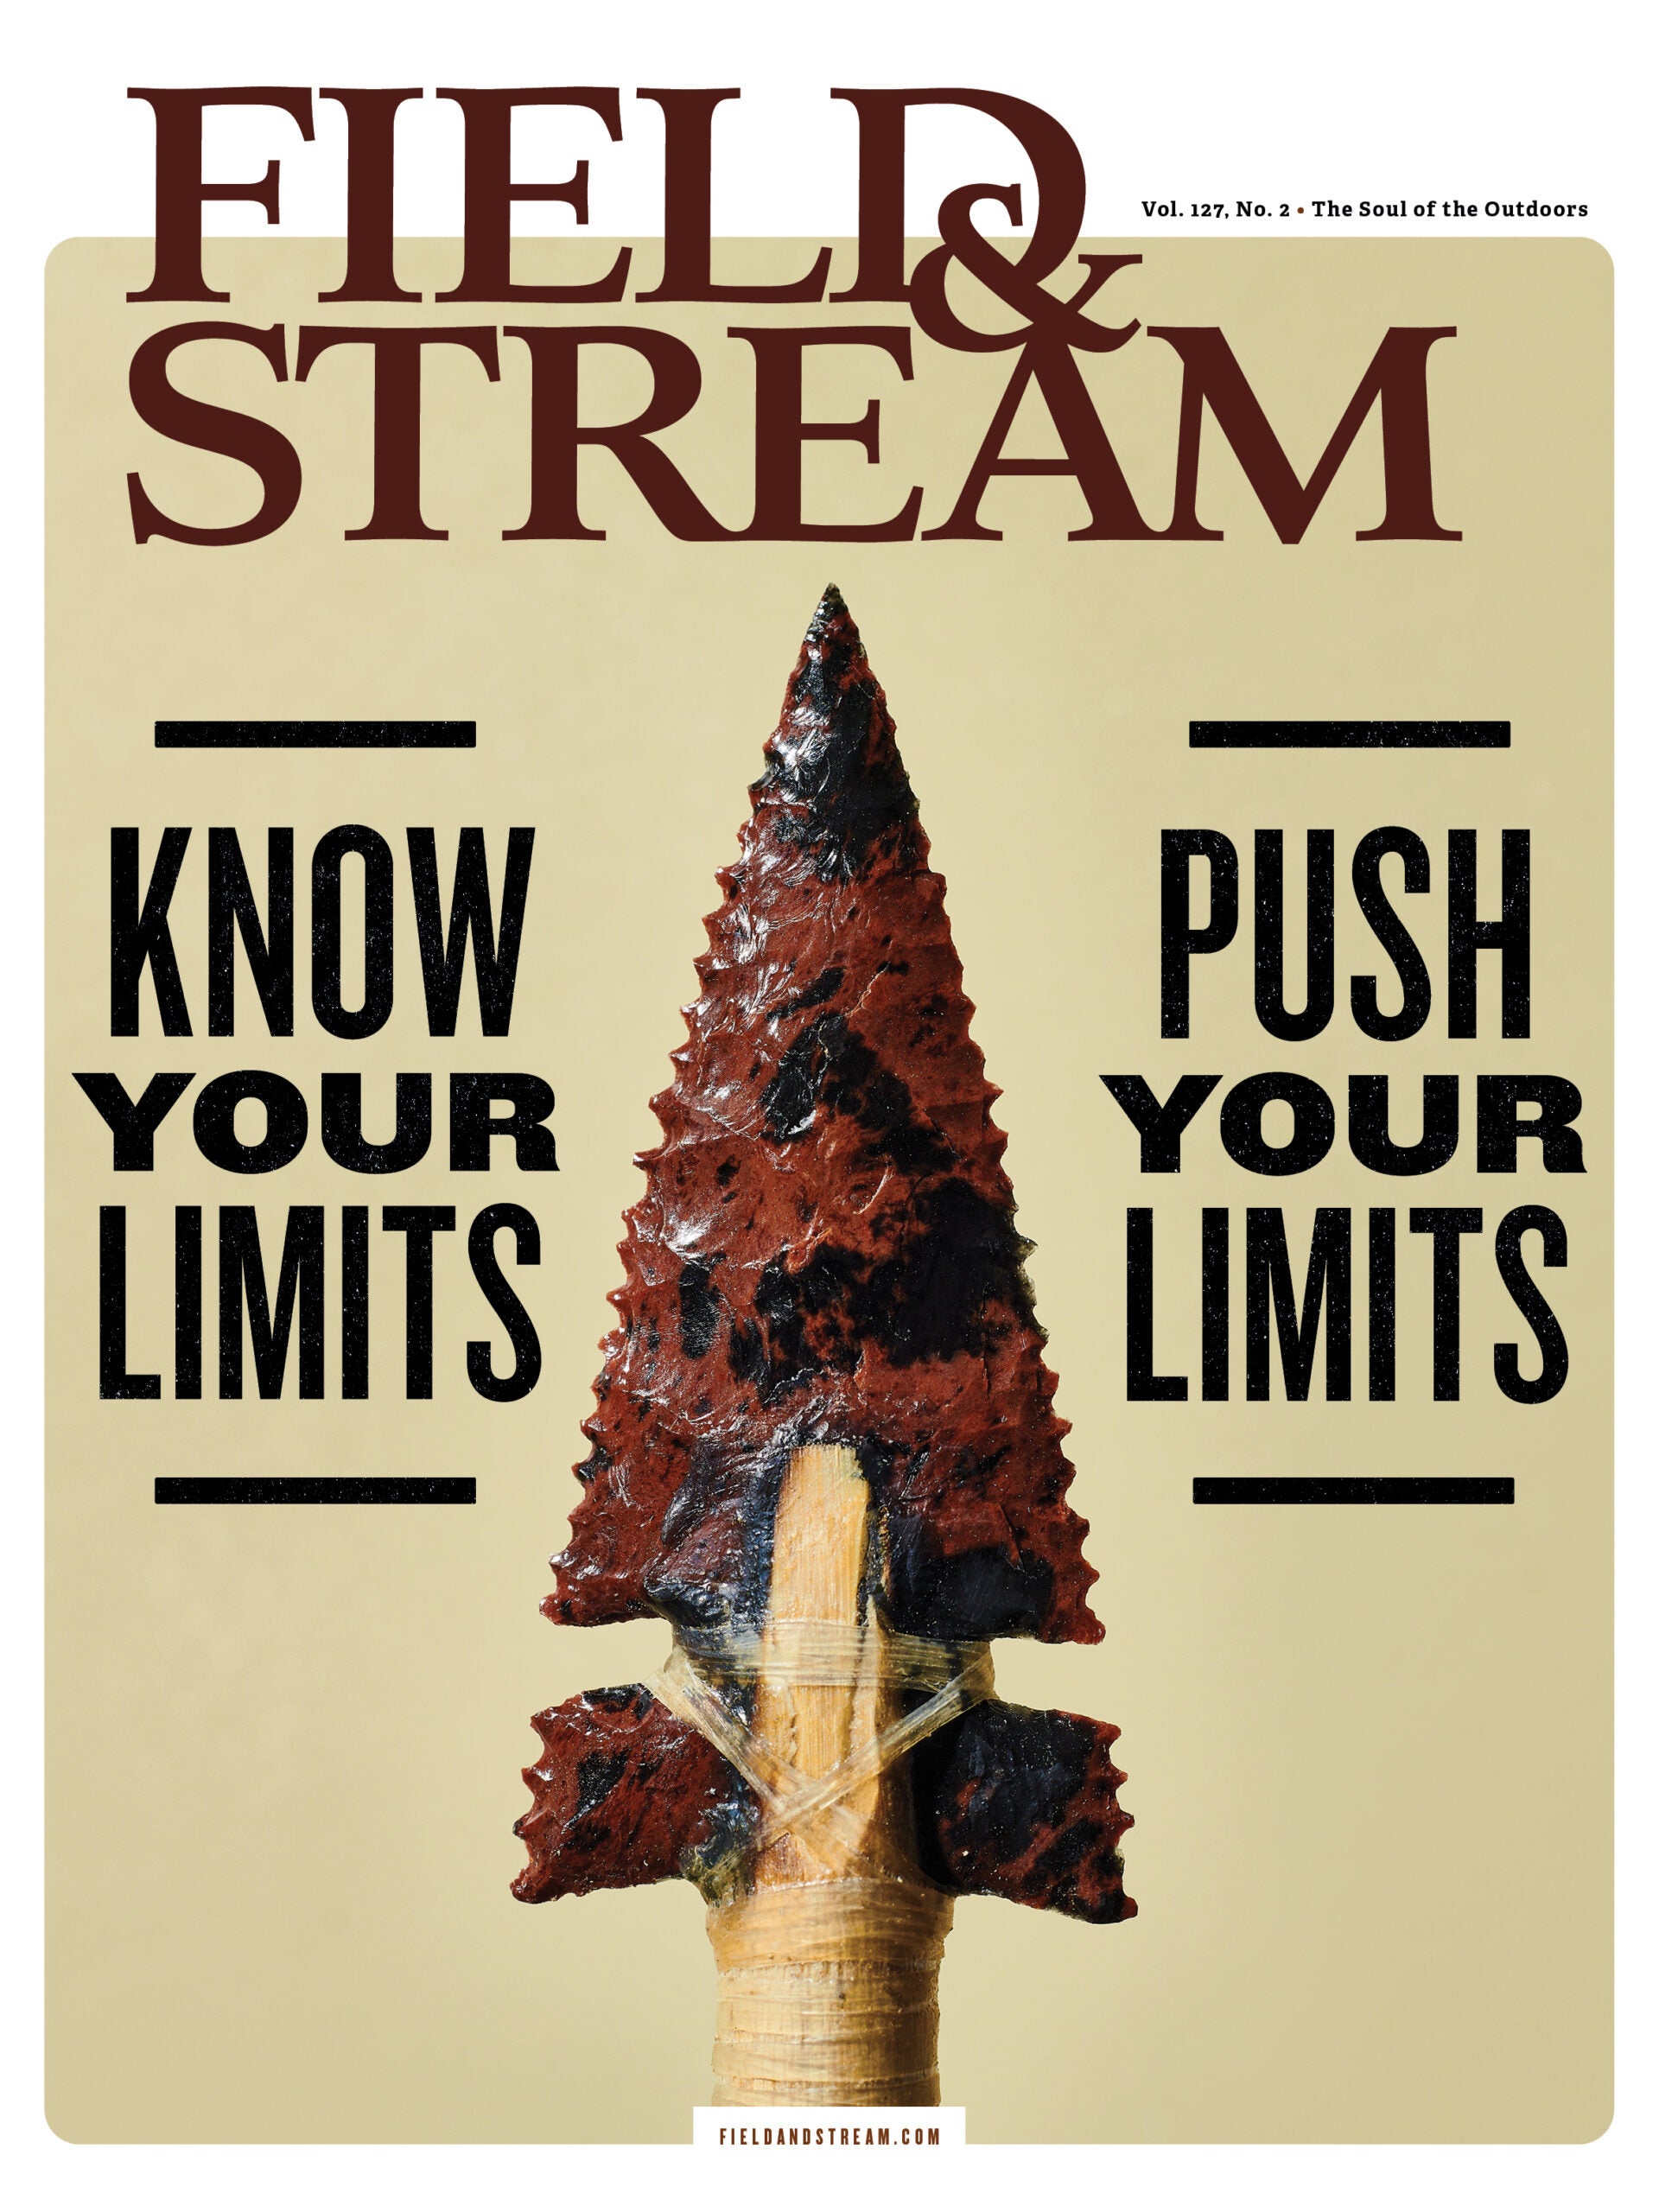 Limits Issue cover of Field & Stream